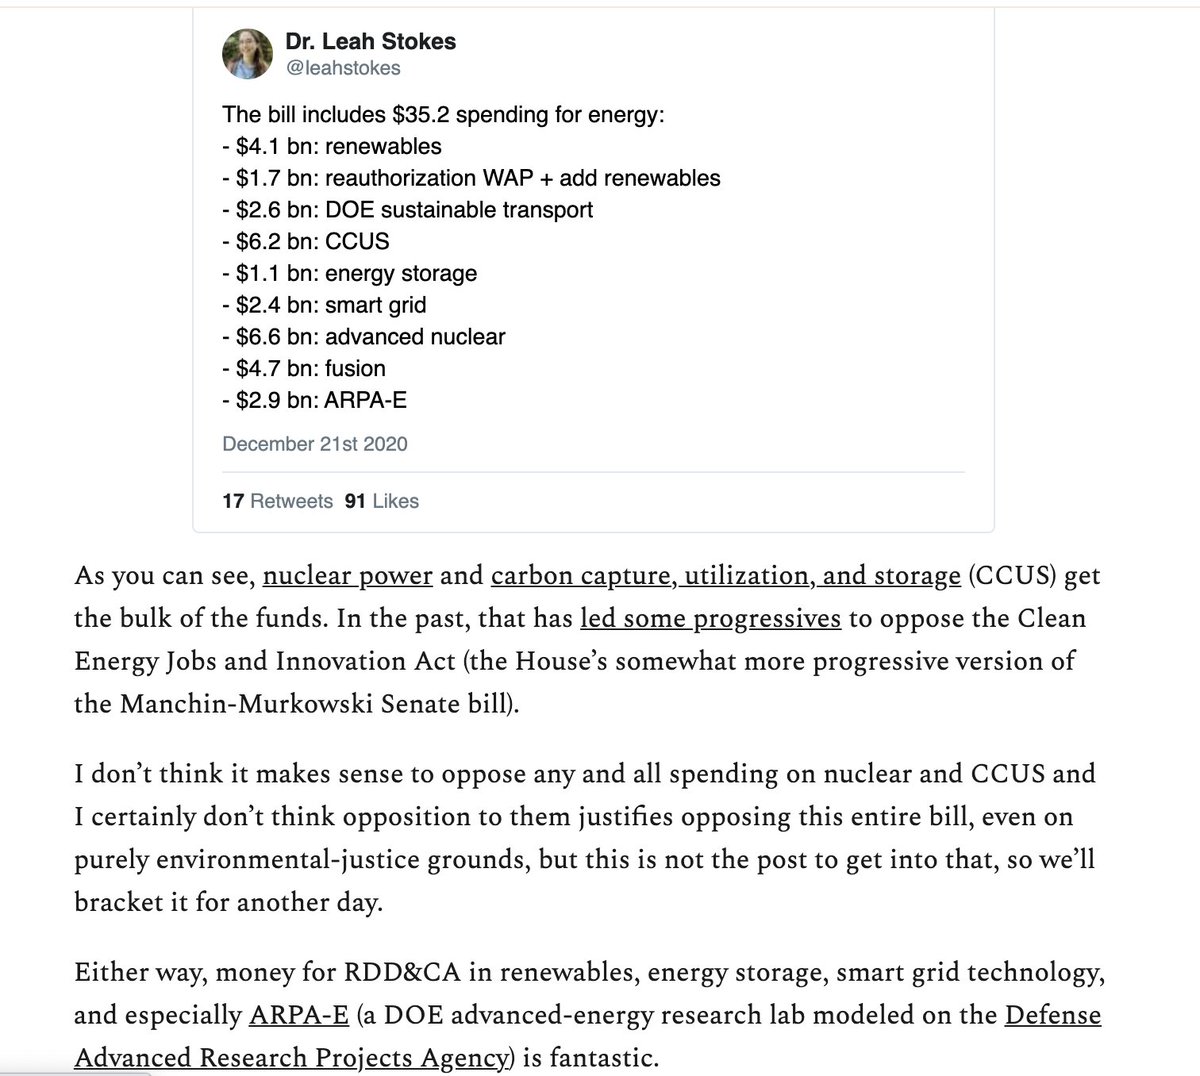 Now, that bipartisan sign-off of course also means that some these policies might not go as far as progressives want or are paired with stuff they may not love (as  @drvolts discusses with regards to the energy material). But it certainly contains stuff they have reason to love